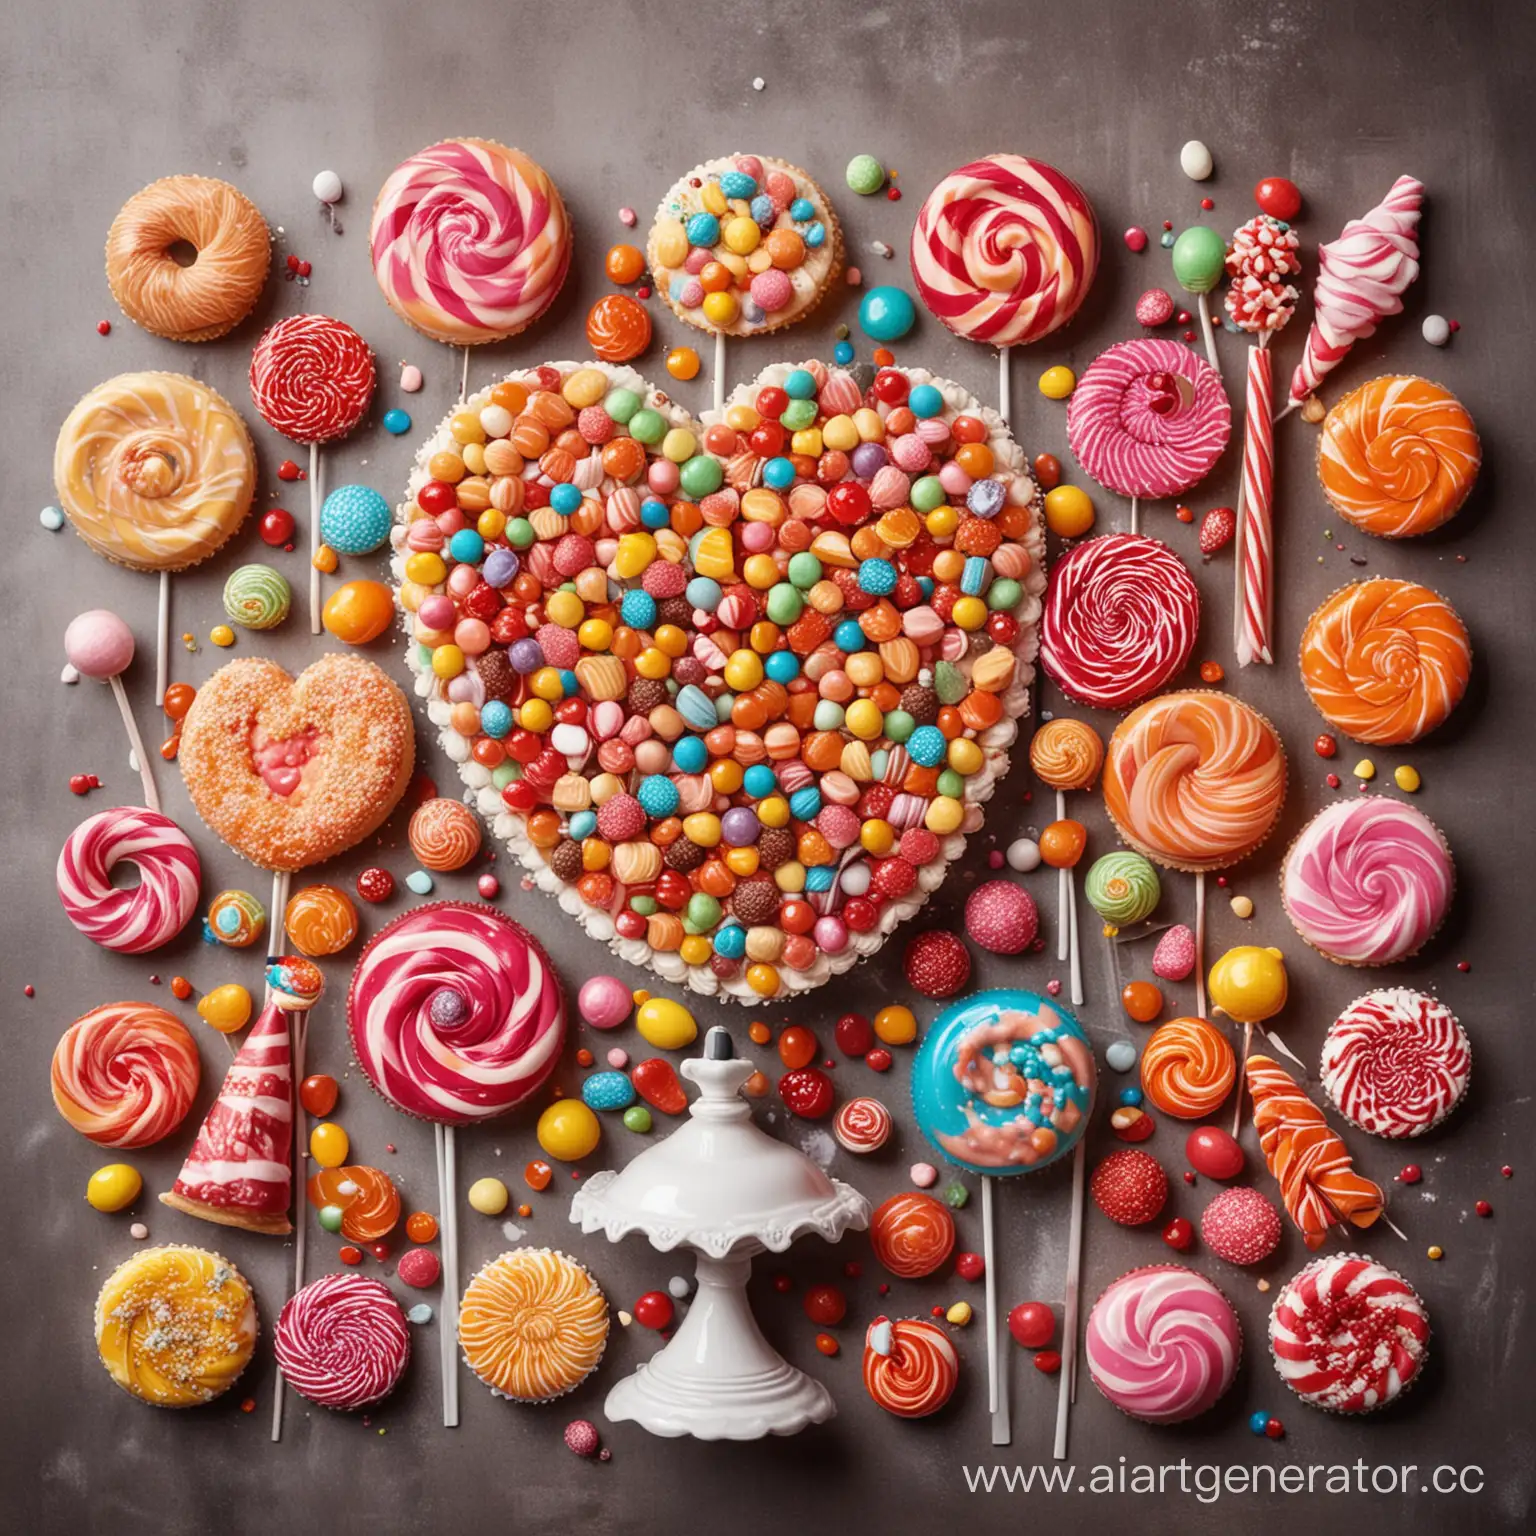 Colorful-Sweets-Delight-Vibrant-Candies-Pastries-Cakes-and-Lollipops